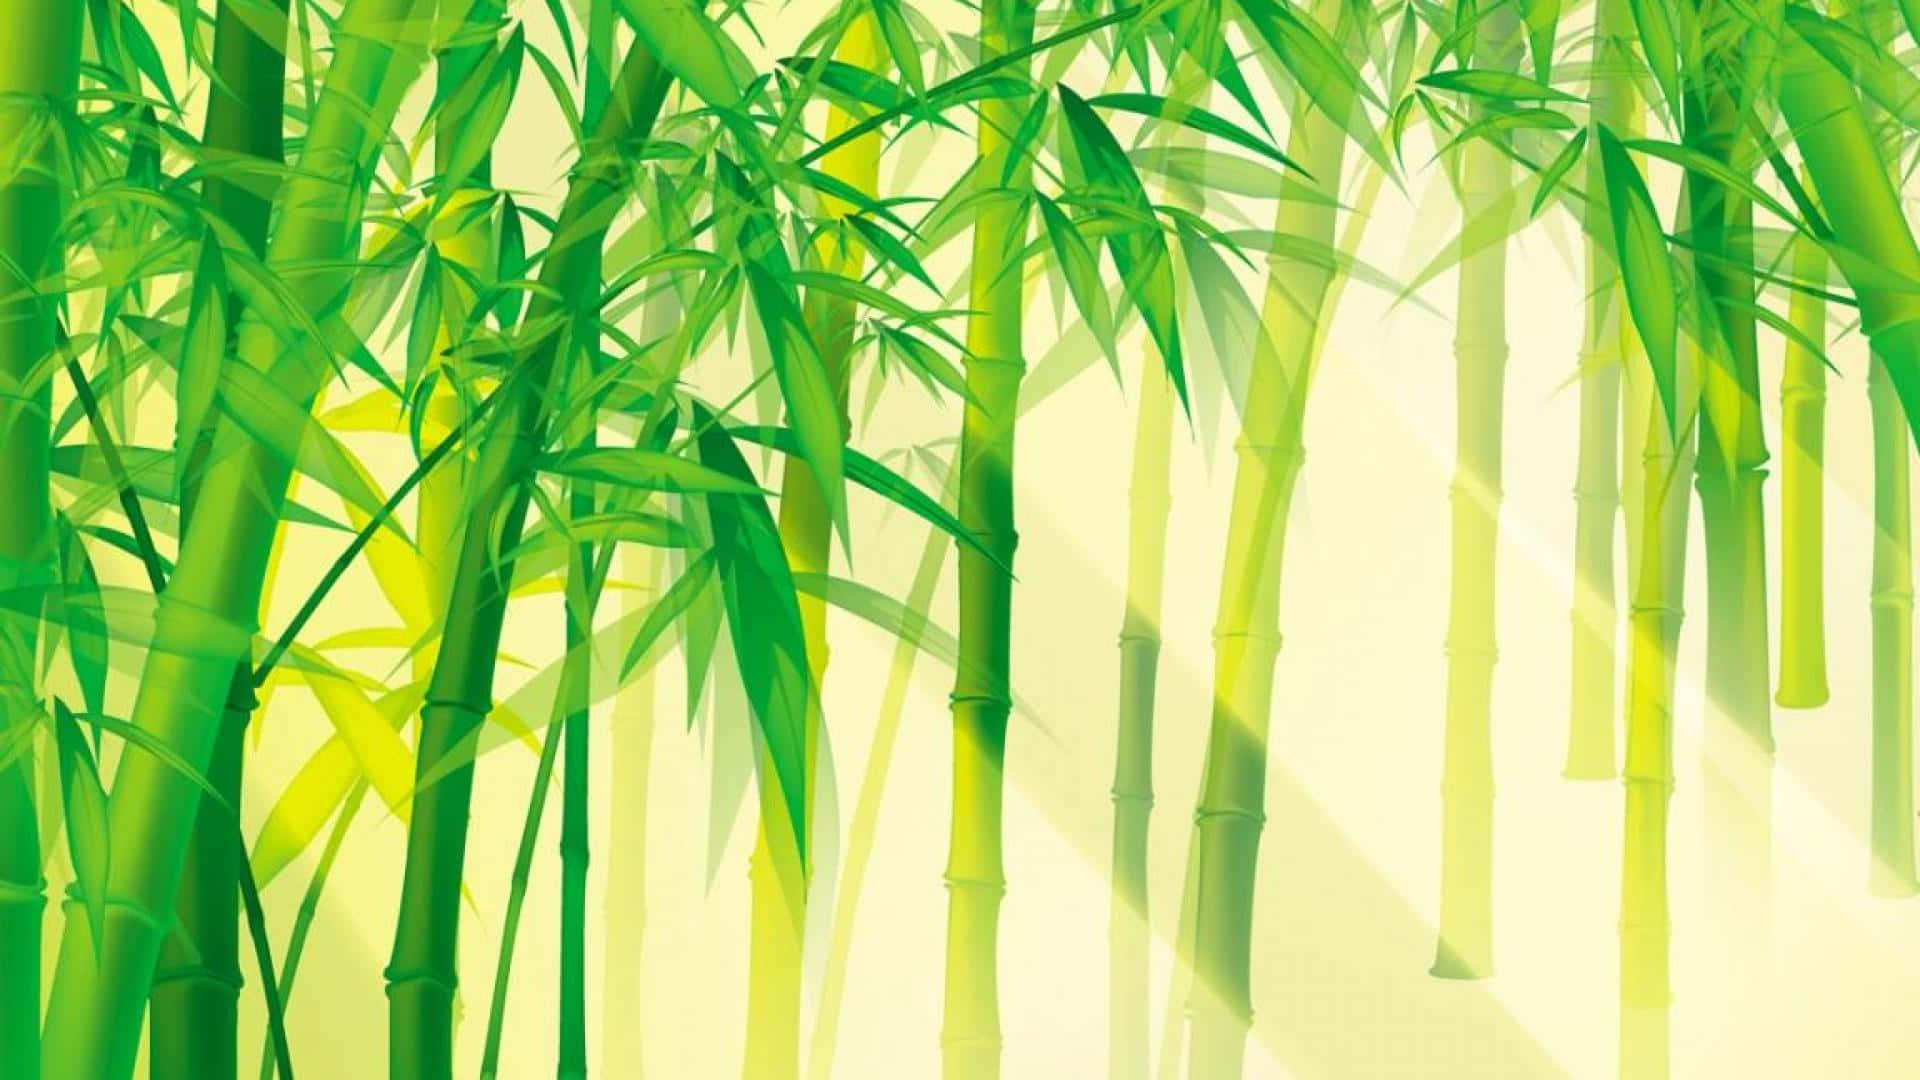 A Bamboo Forest With Sunlight Shining Through The Leaves Wallpaper